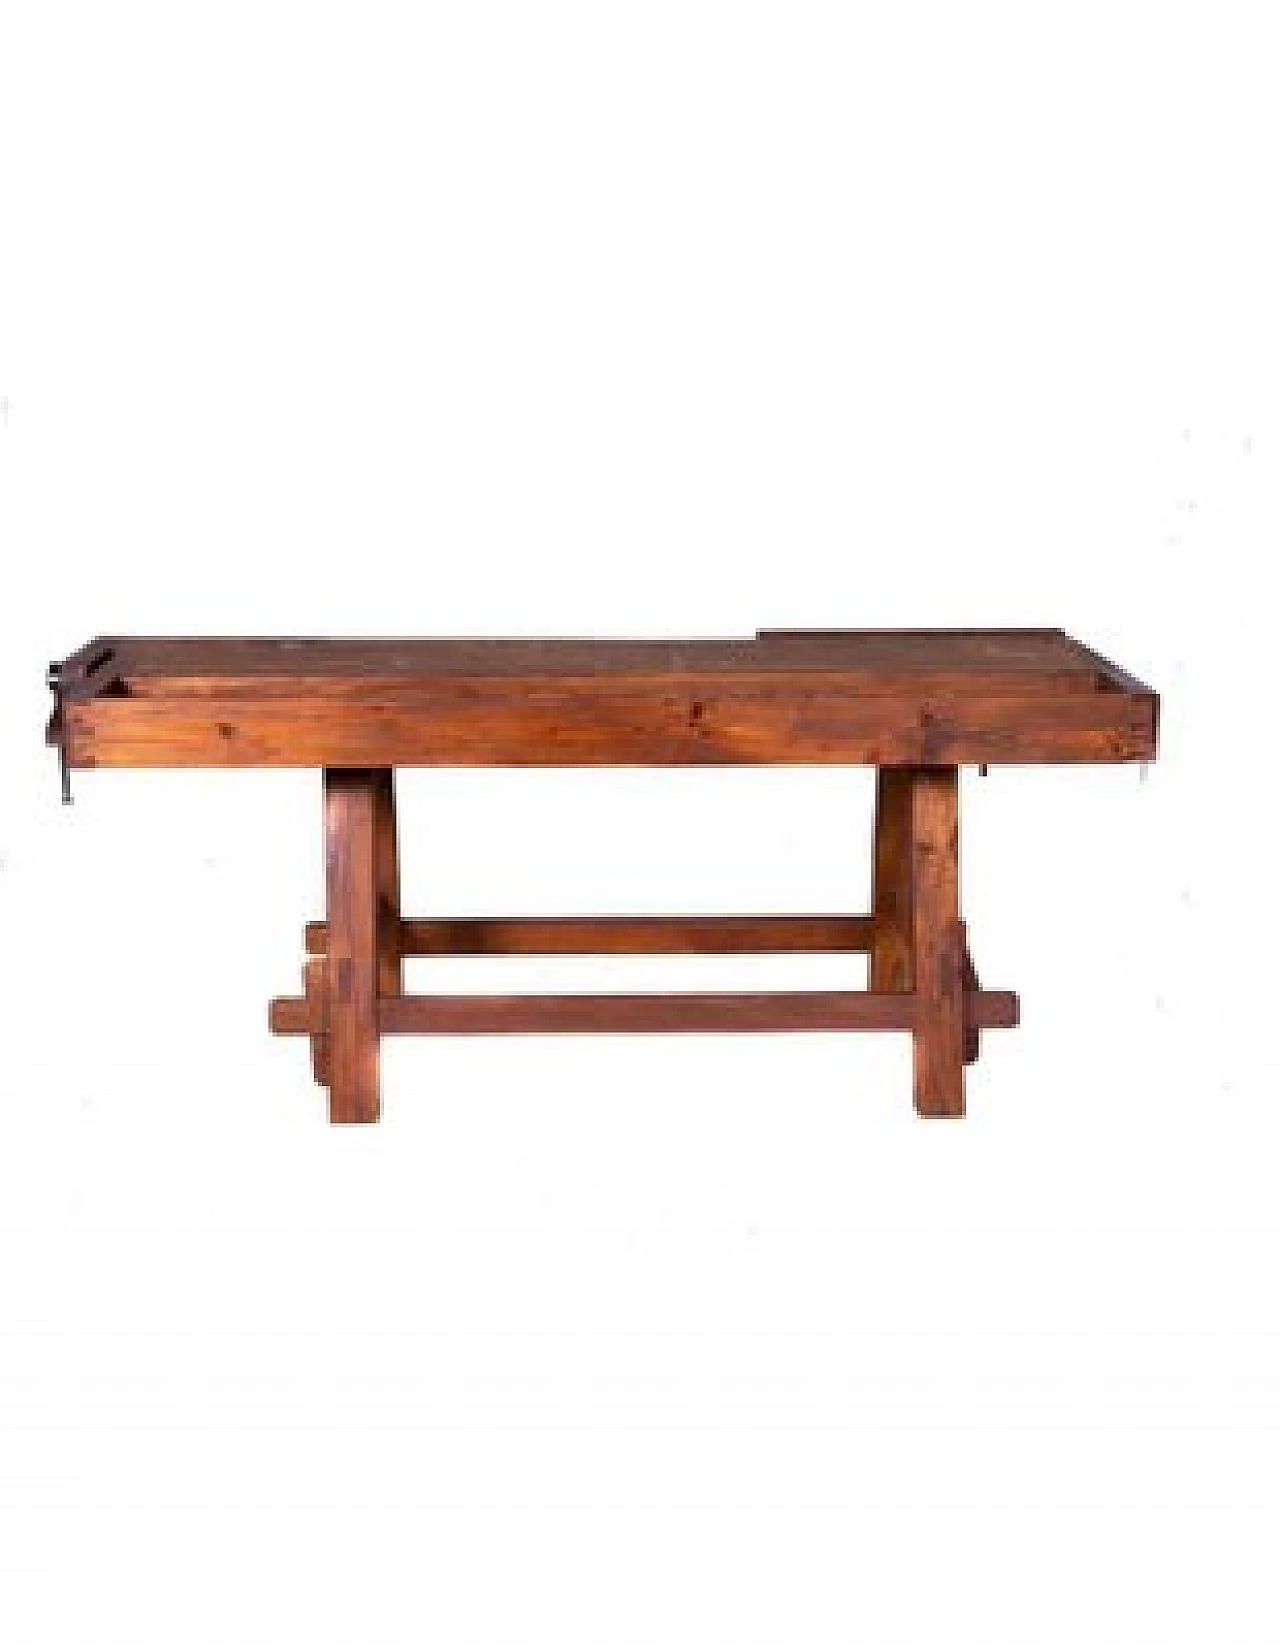 Solid wood and cast iron carpenter's bench 16